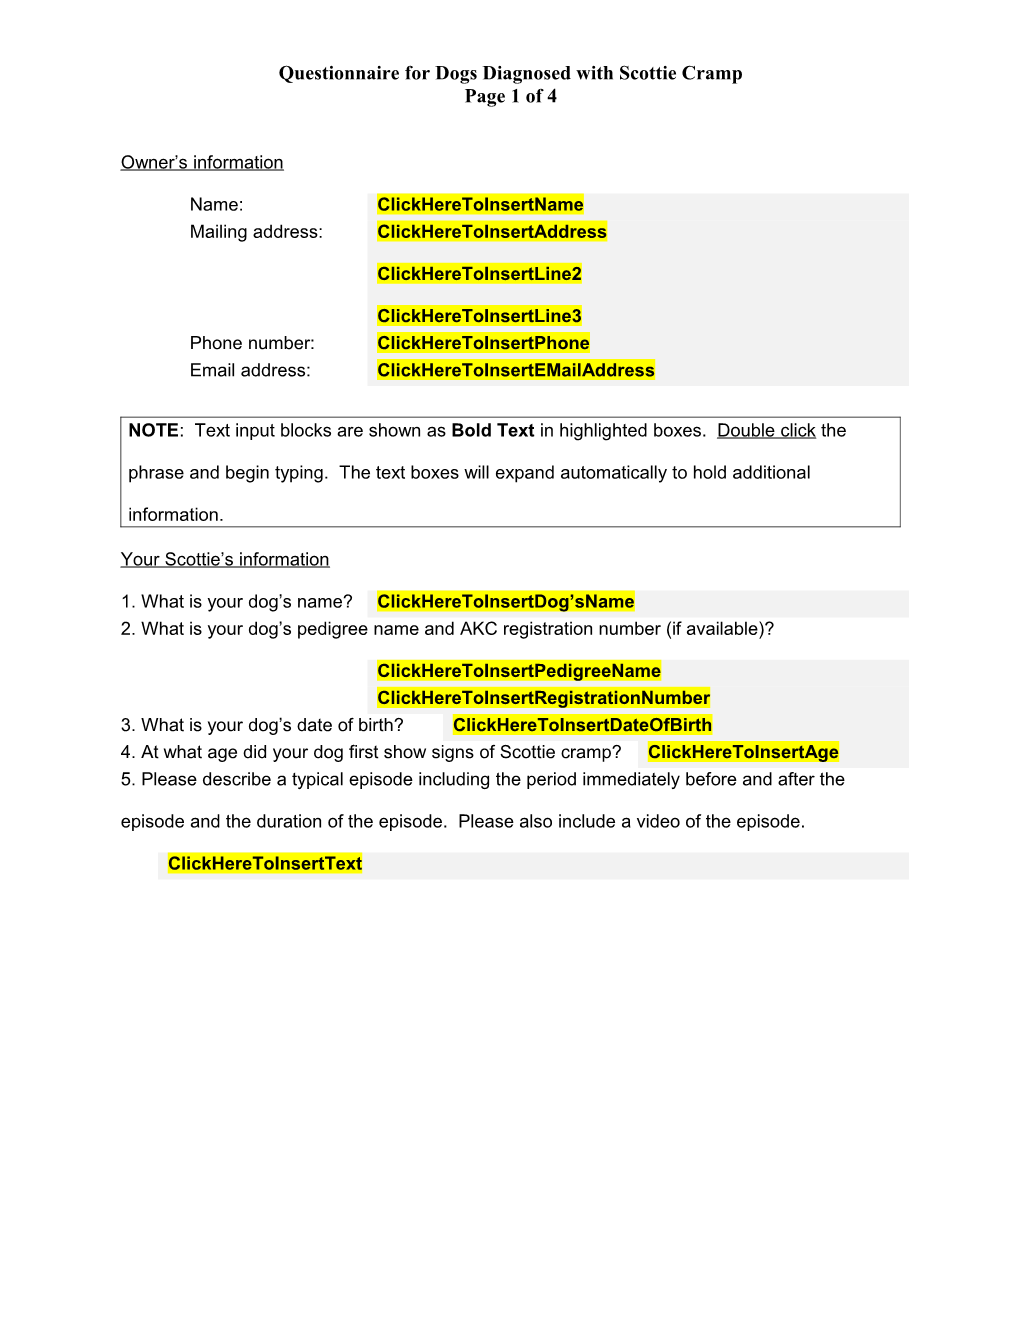 Questionnaire for Dogs Diagnosed with Scottie Cramp Page 1 of 4